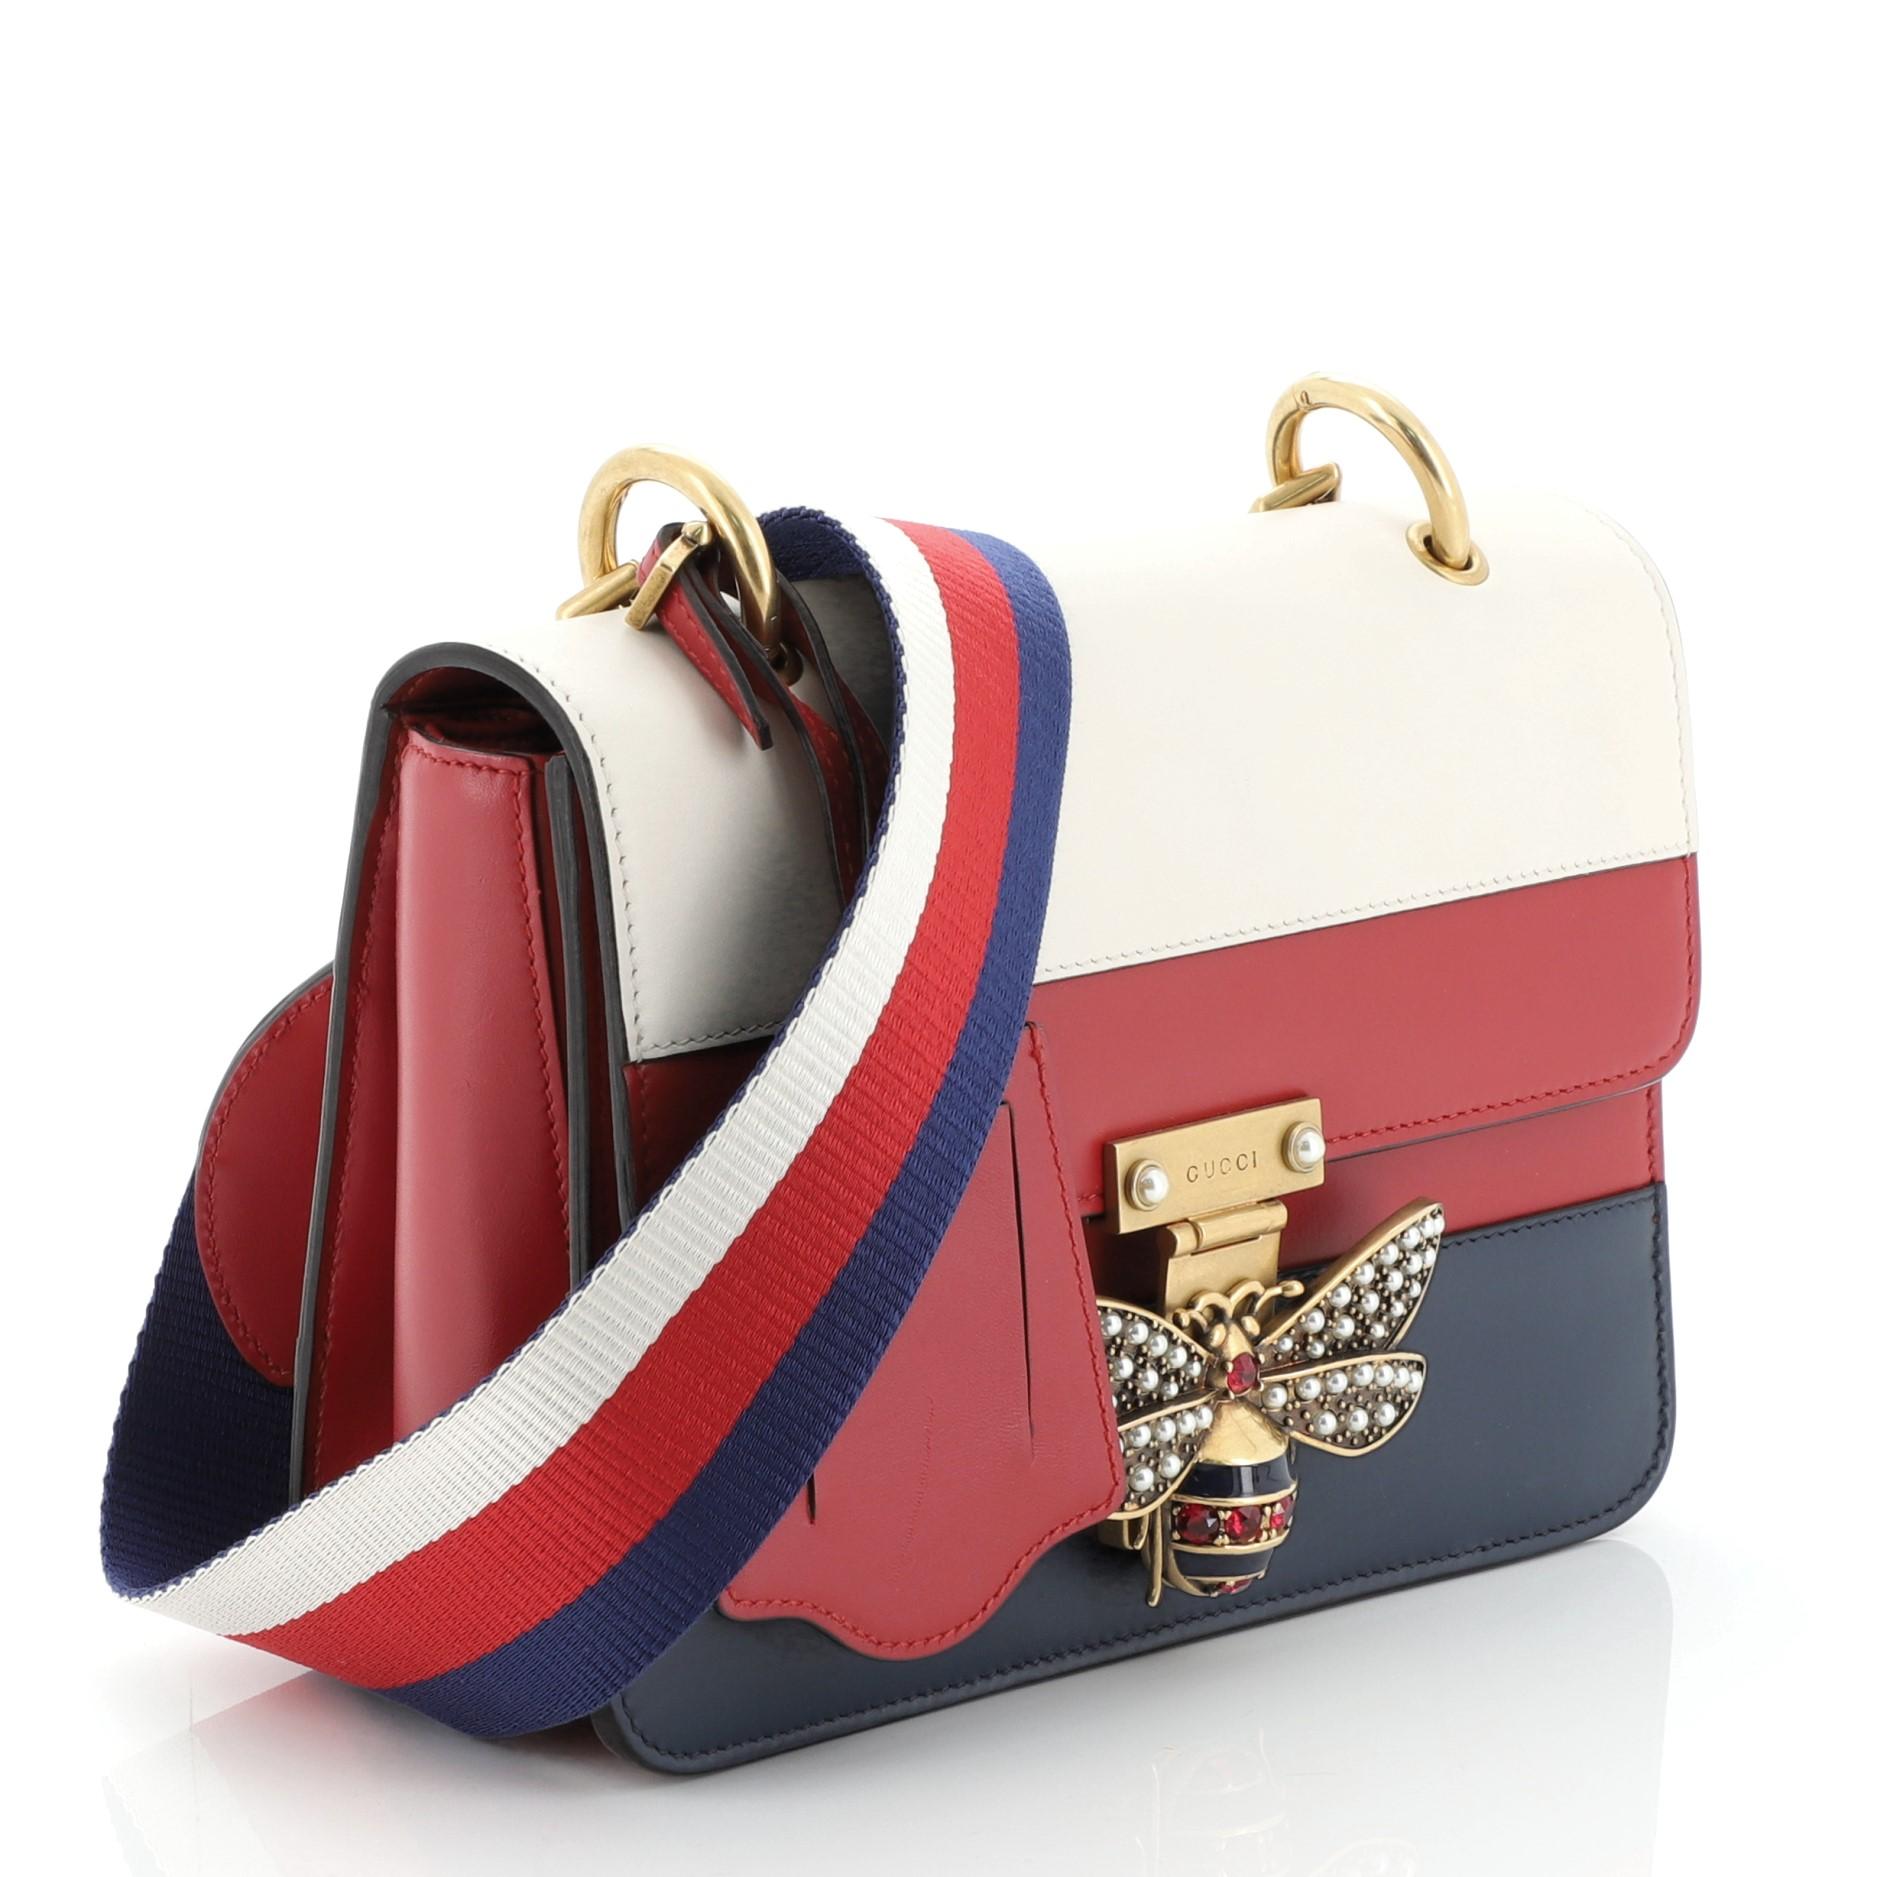 This Gucci Queen Margaret Flap Bag Colorblock Leather Medium, crafted from red, blue, white multicolor leather, features web shoulder strap, bejeweled bee on its flap, and aged gold-tone hardware. It opens to a neutral microfiber interior with side